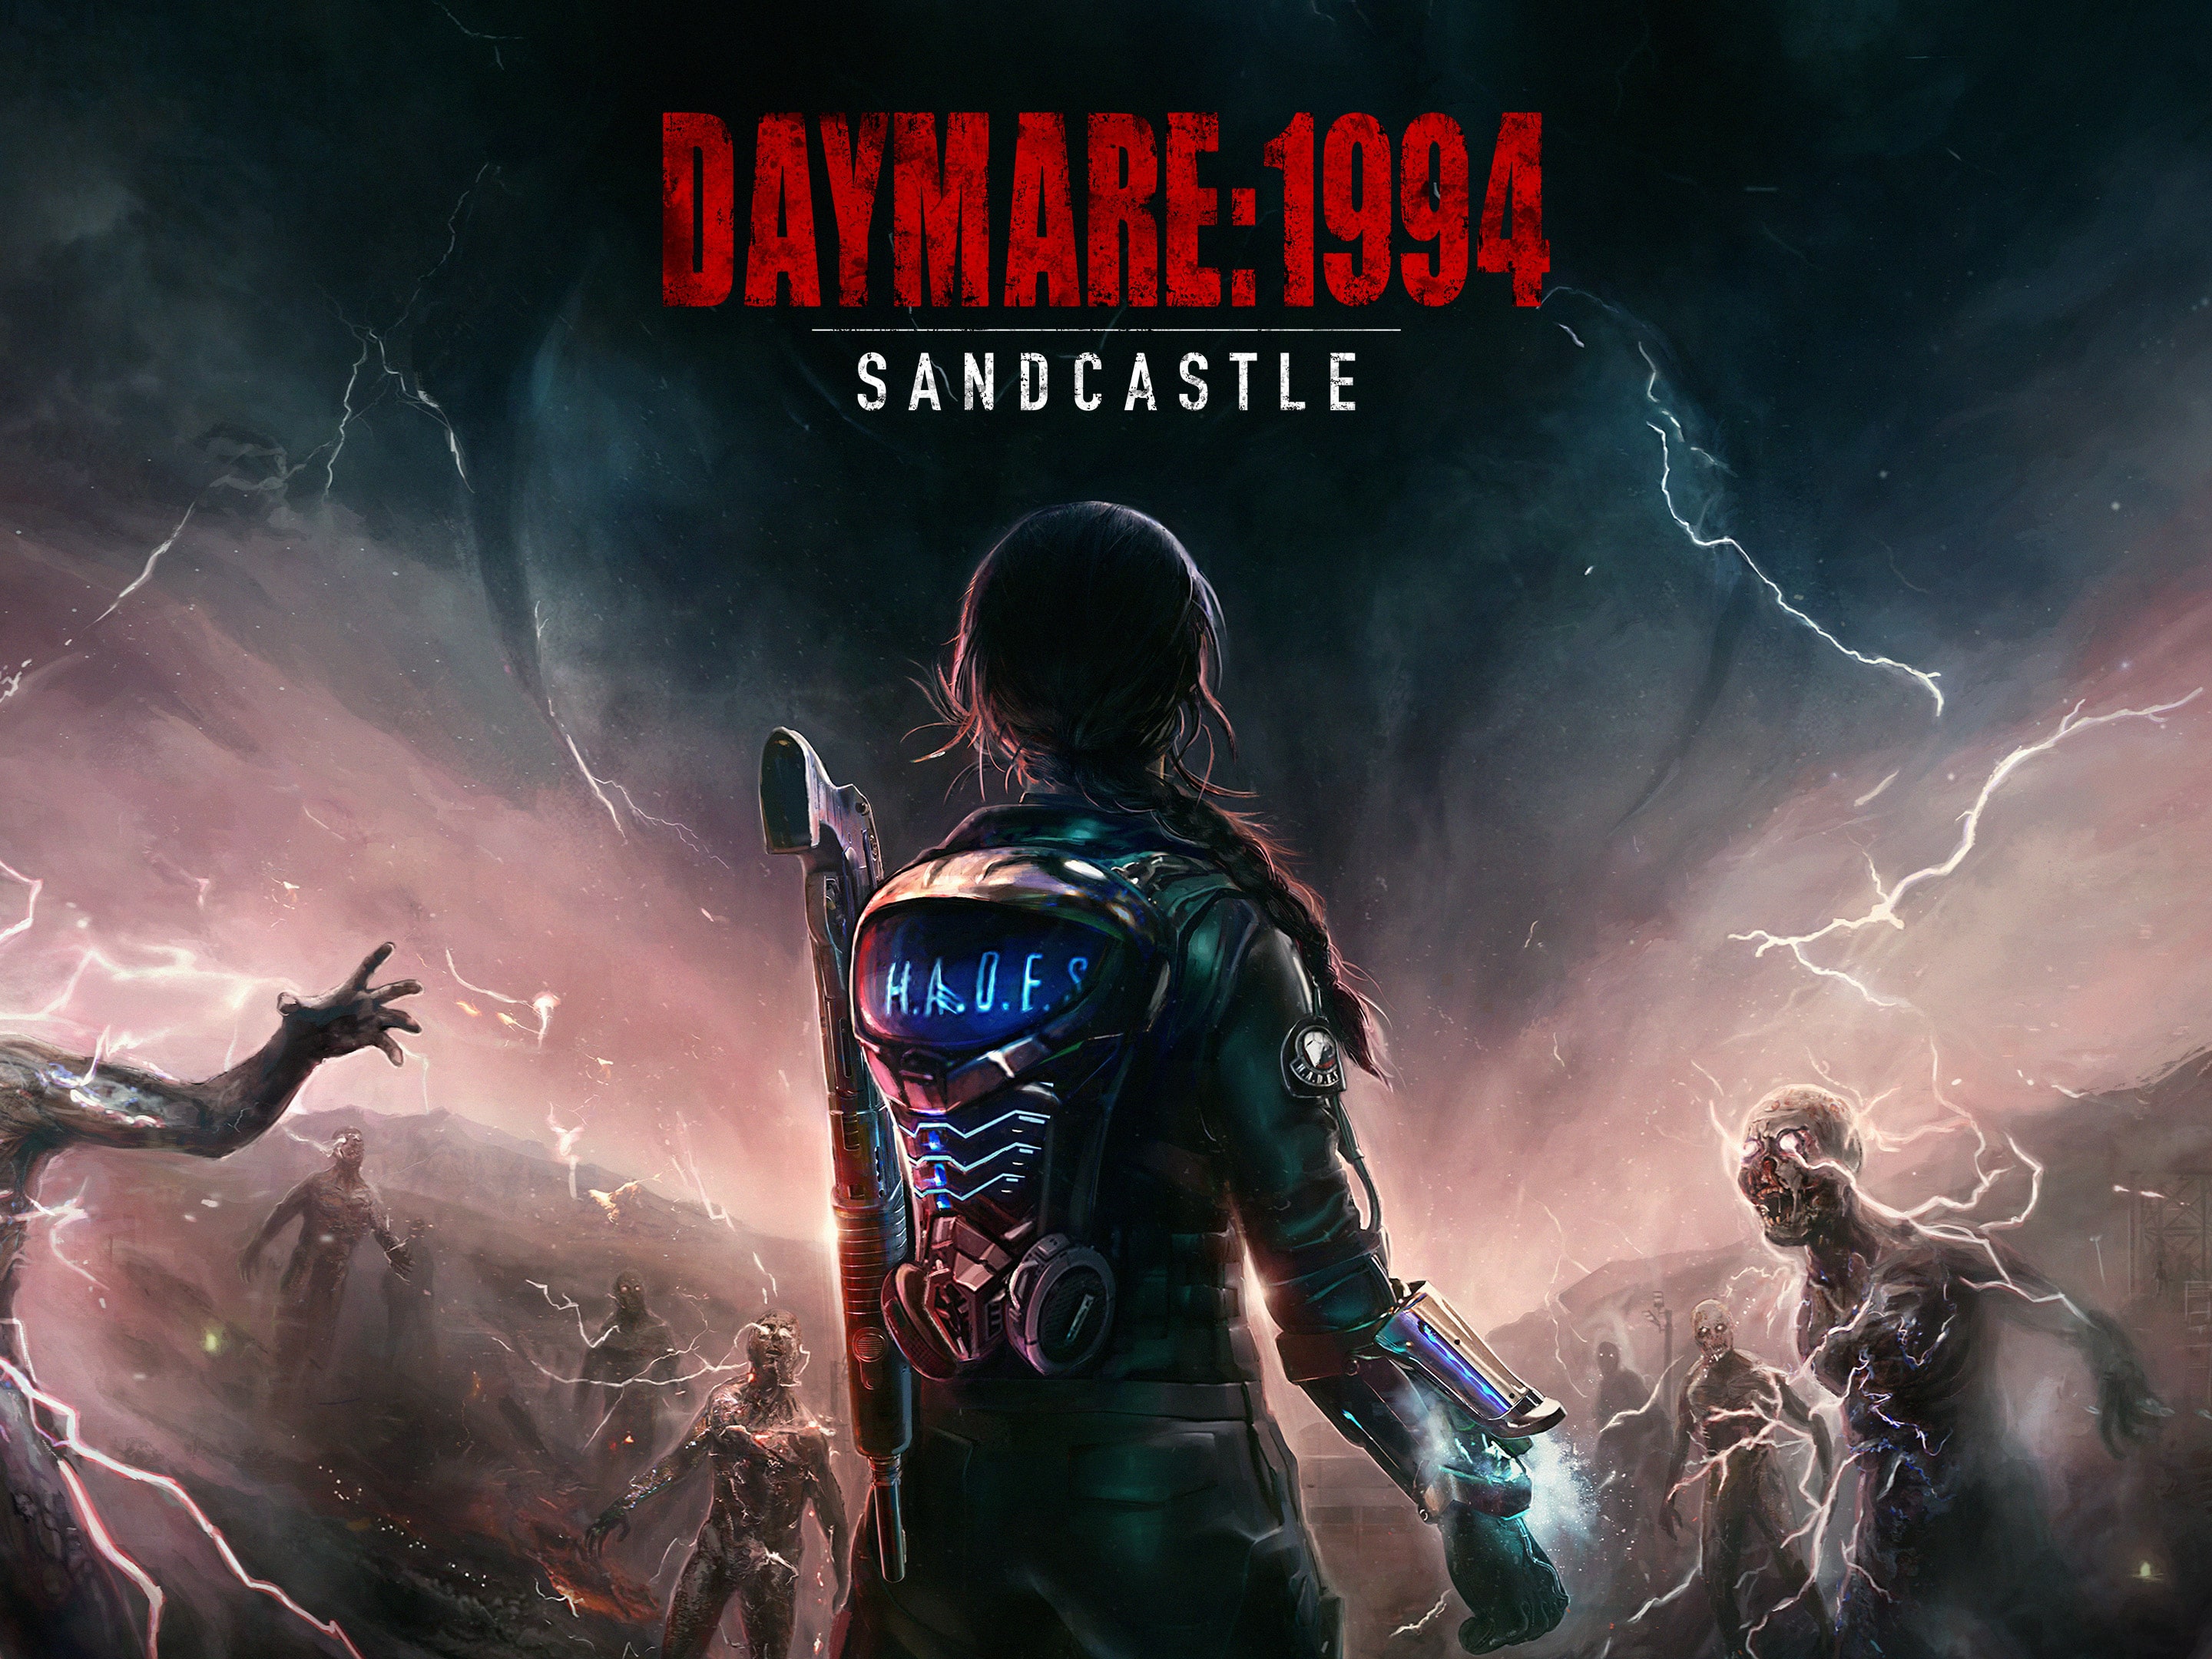 Daymare: 1994 Sandcastle, GS2 Games, PlayStation 4, GS00100 